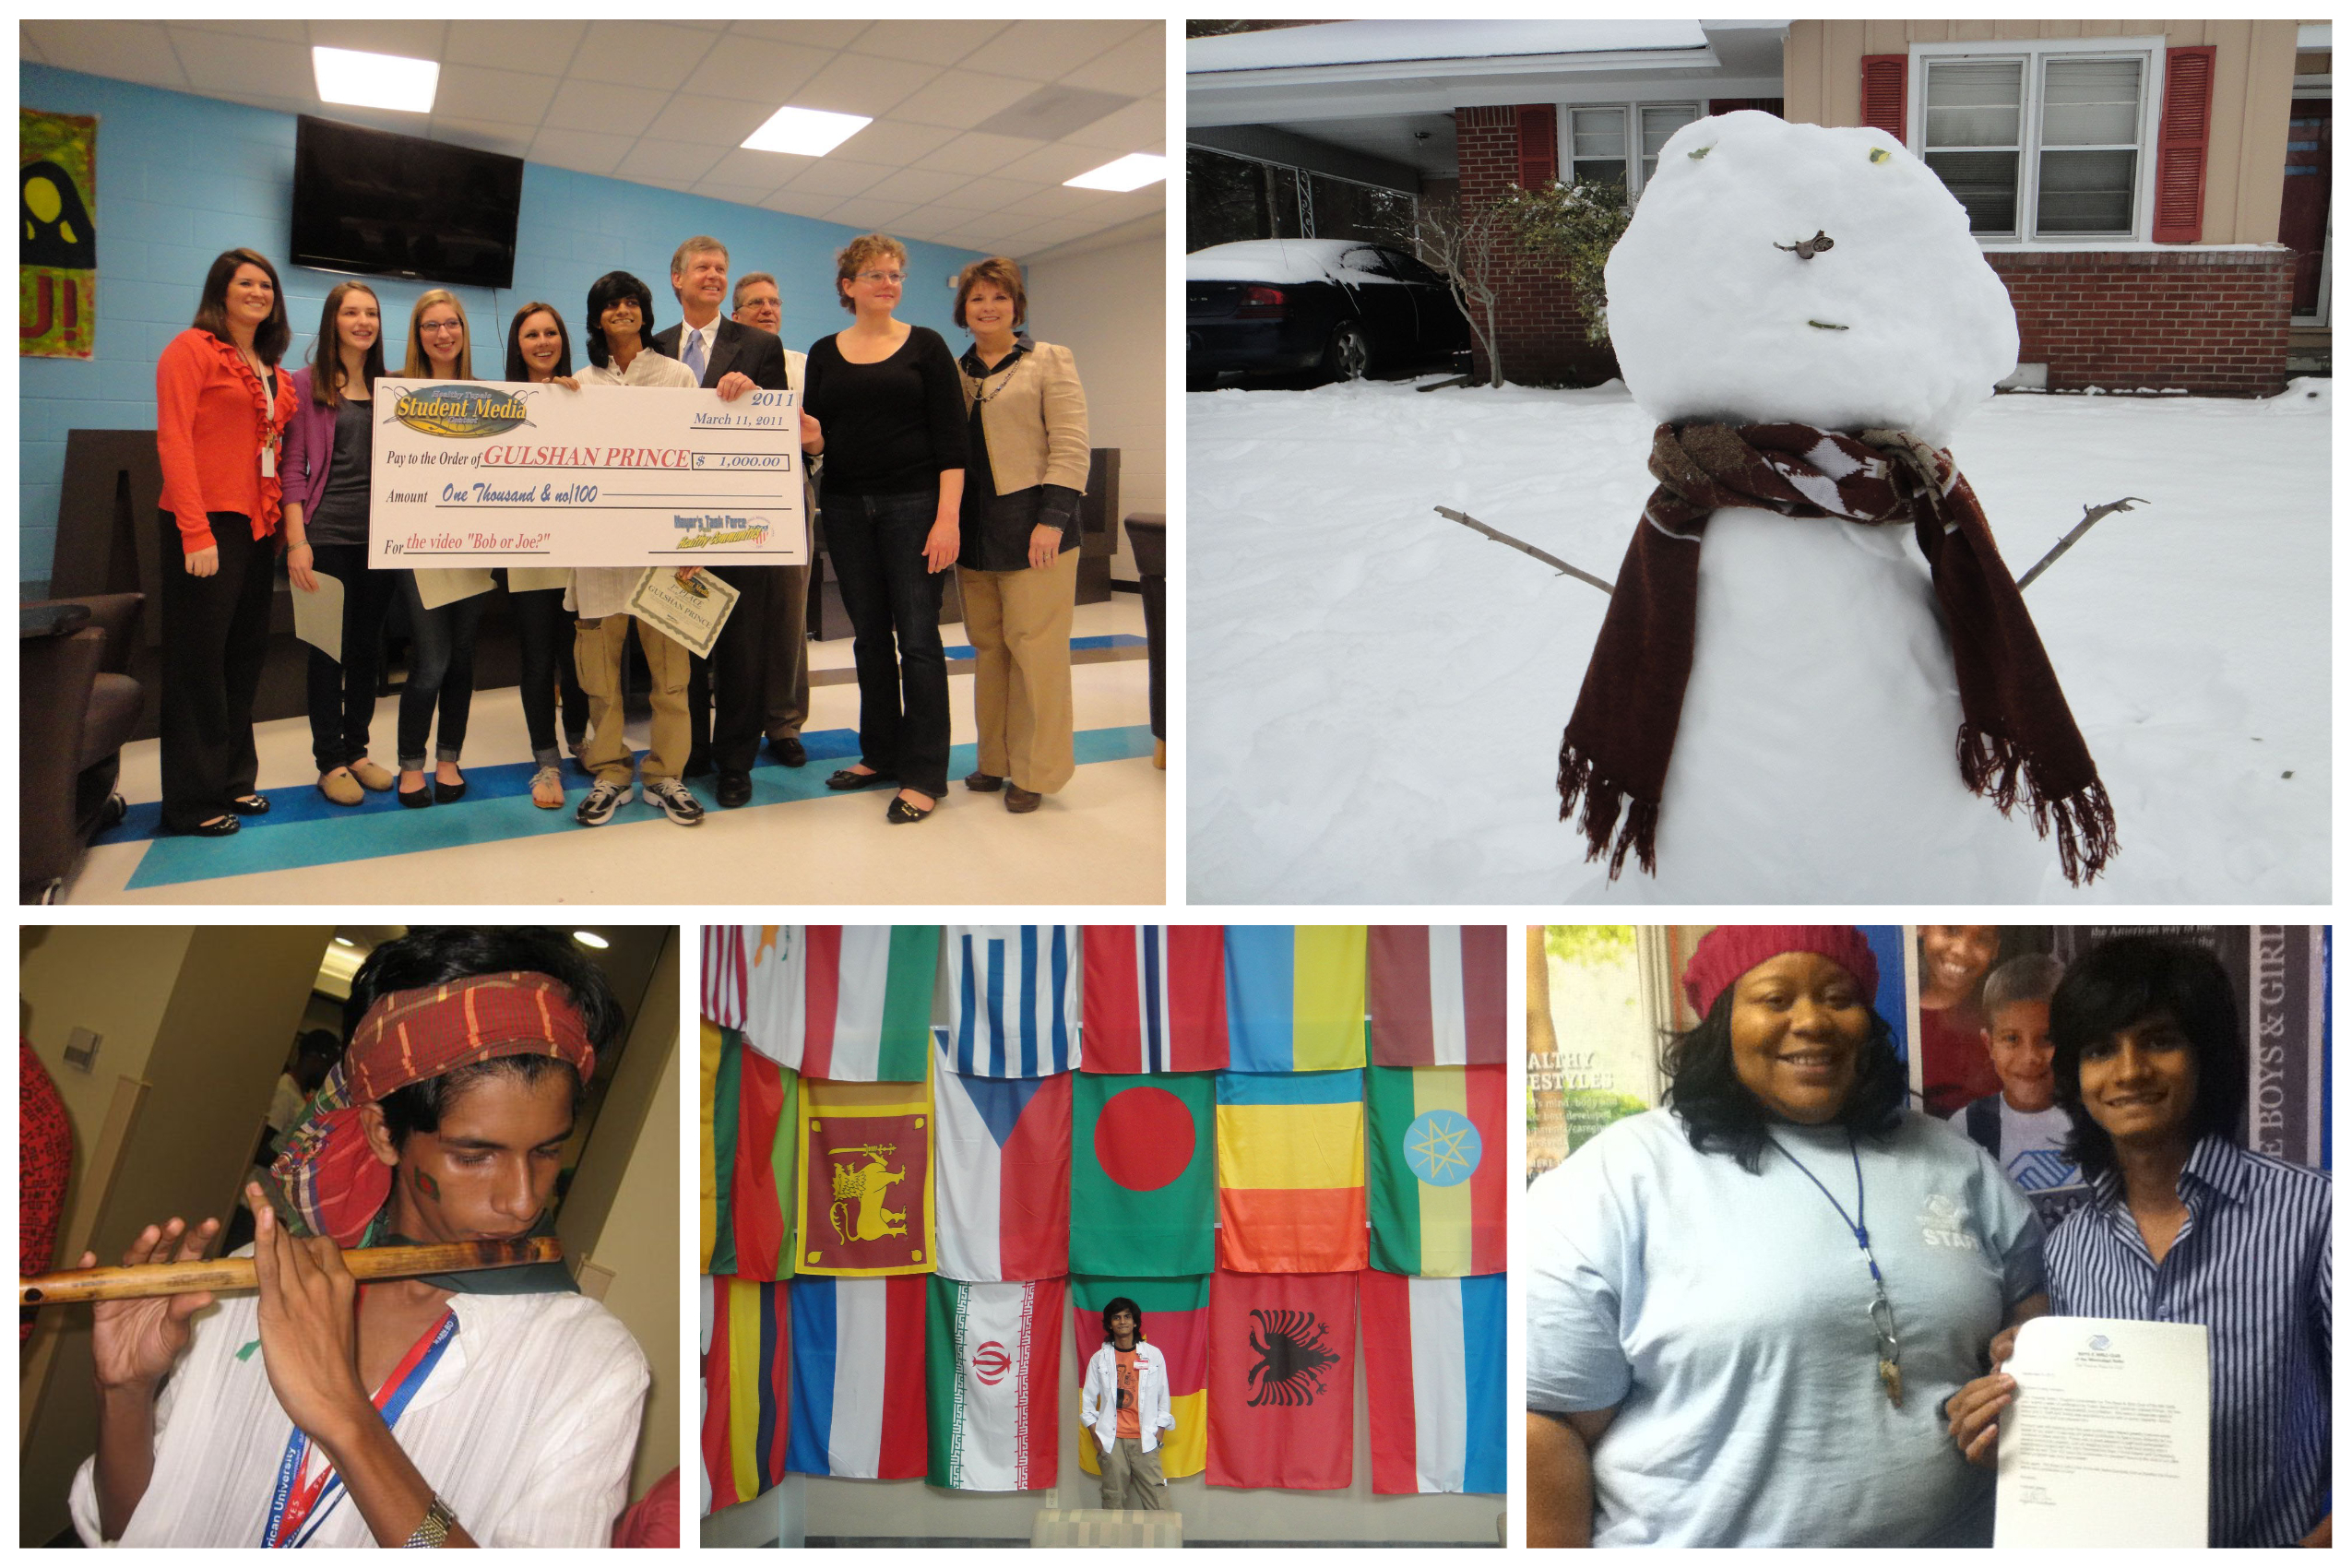 A Collage Of Photos Including A Snowman The Alum Playing An Instrument And Standing With Flags And Accepting Awards